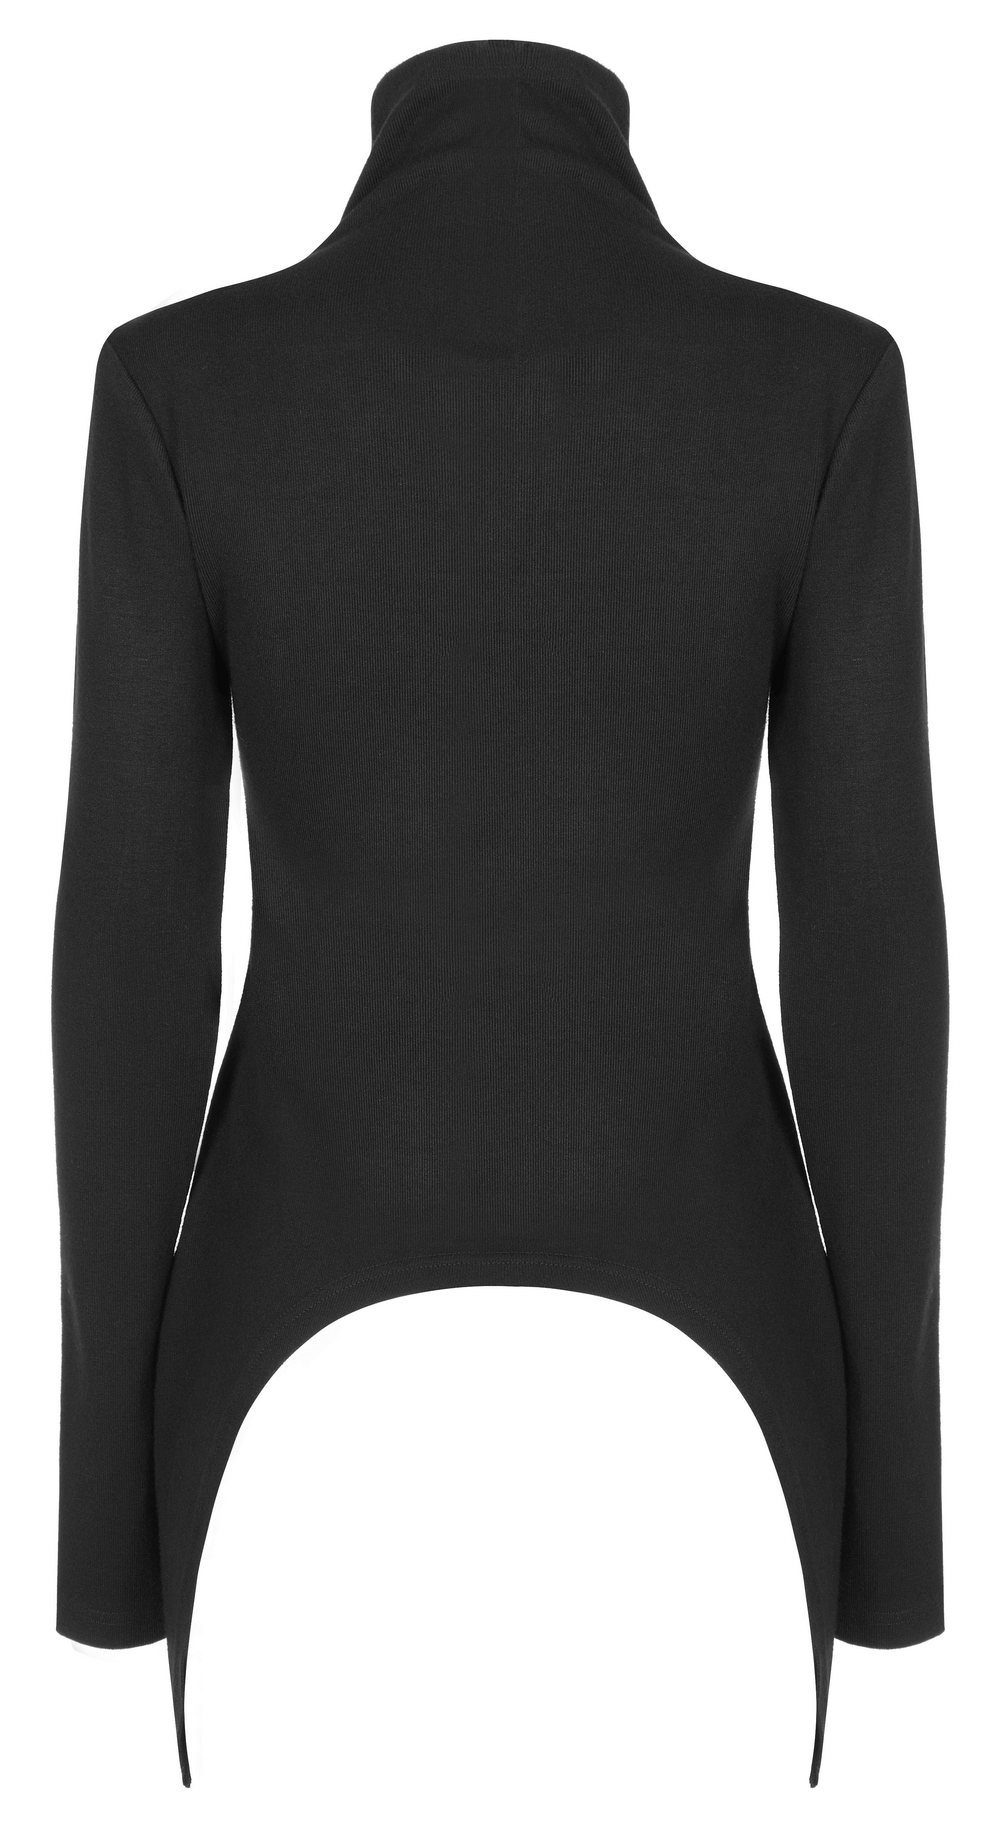 Unique High Collar Cut-Out Gothic Fitted Top for Women - HARD'N'HEAVY